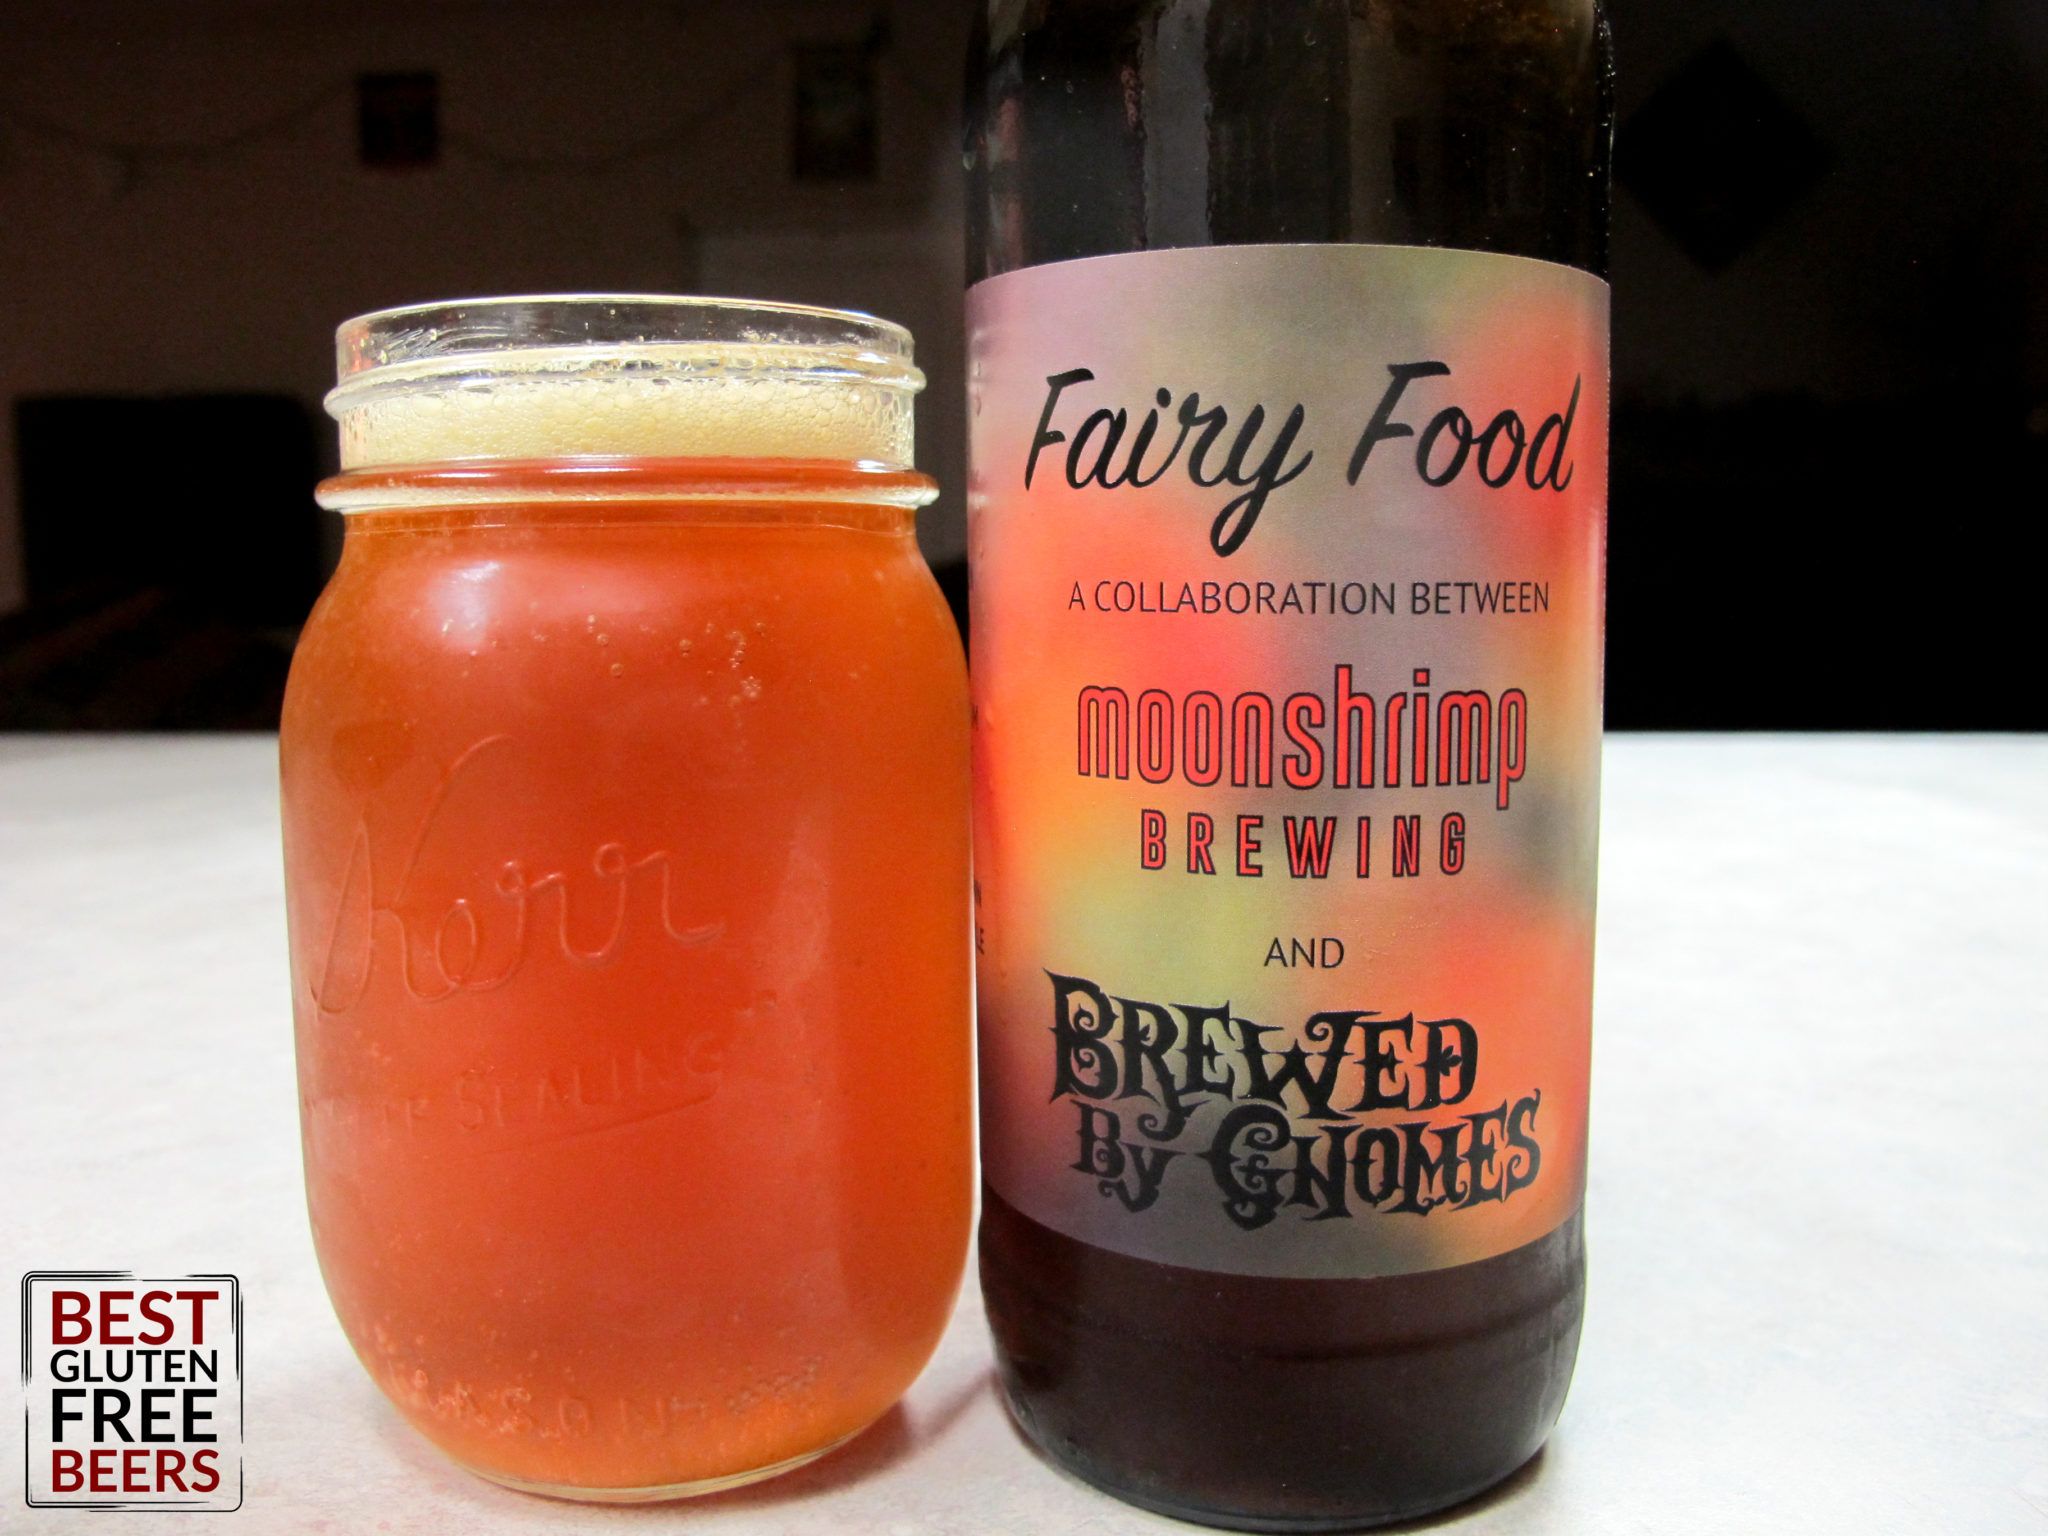 Fairy Food Ale By Moonshrimp Brewing + Brewed By Gnomes